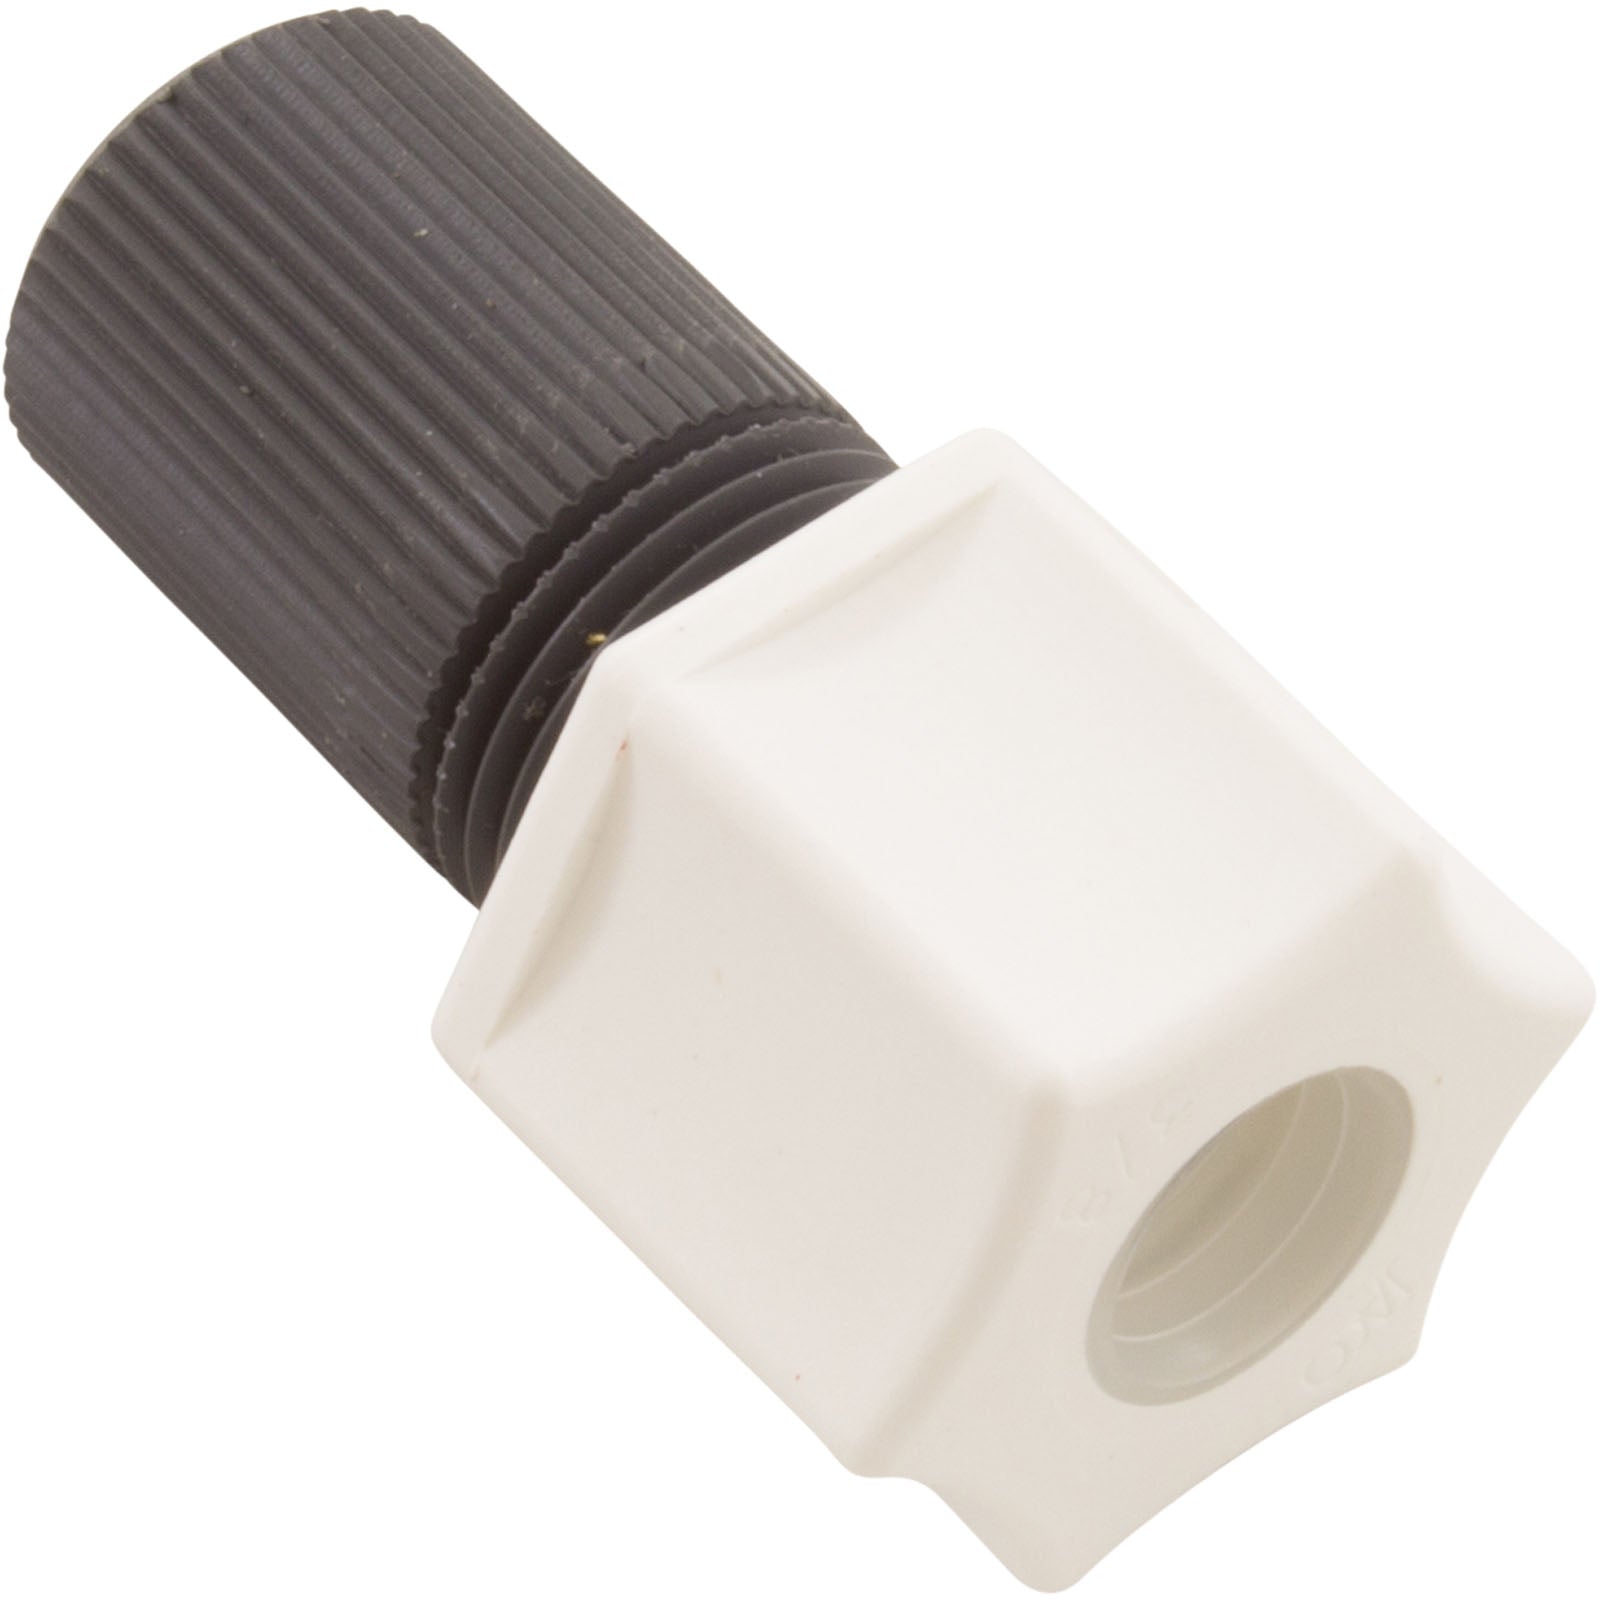 Connecting Nut, Qty 2, Stenner, 3/8", w/ 1/4" Adapter,  UCADPTR